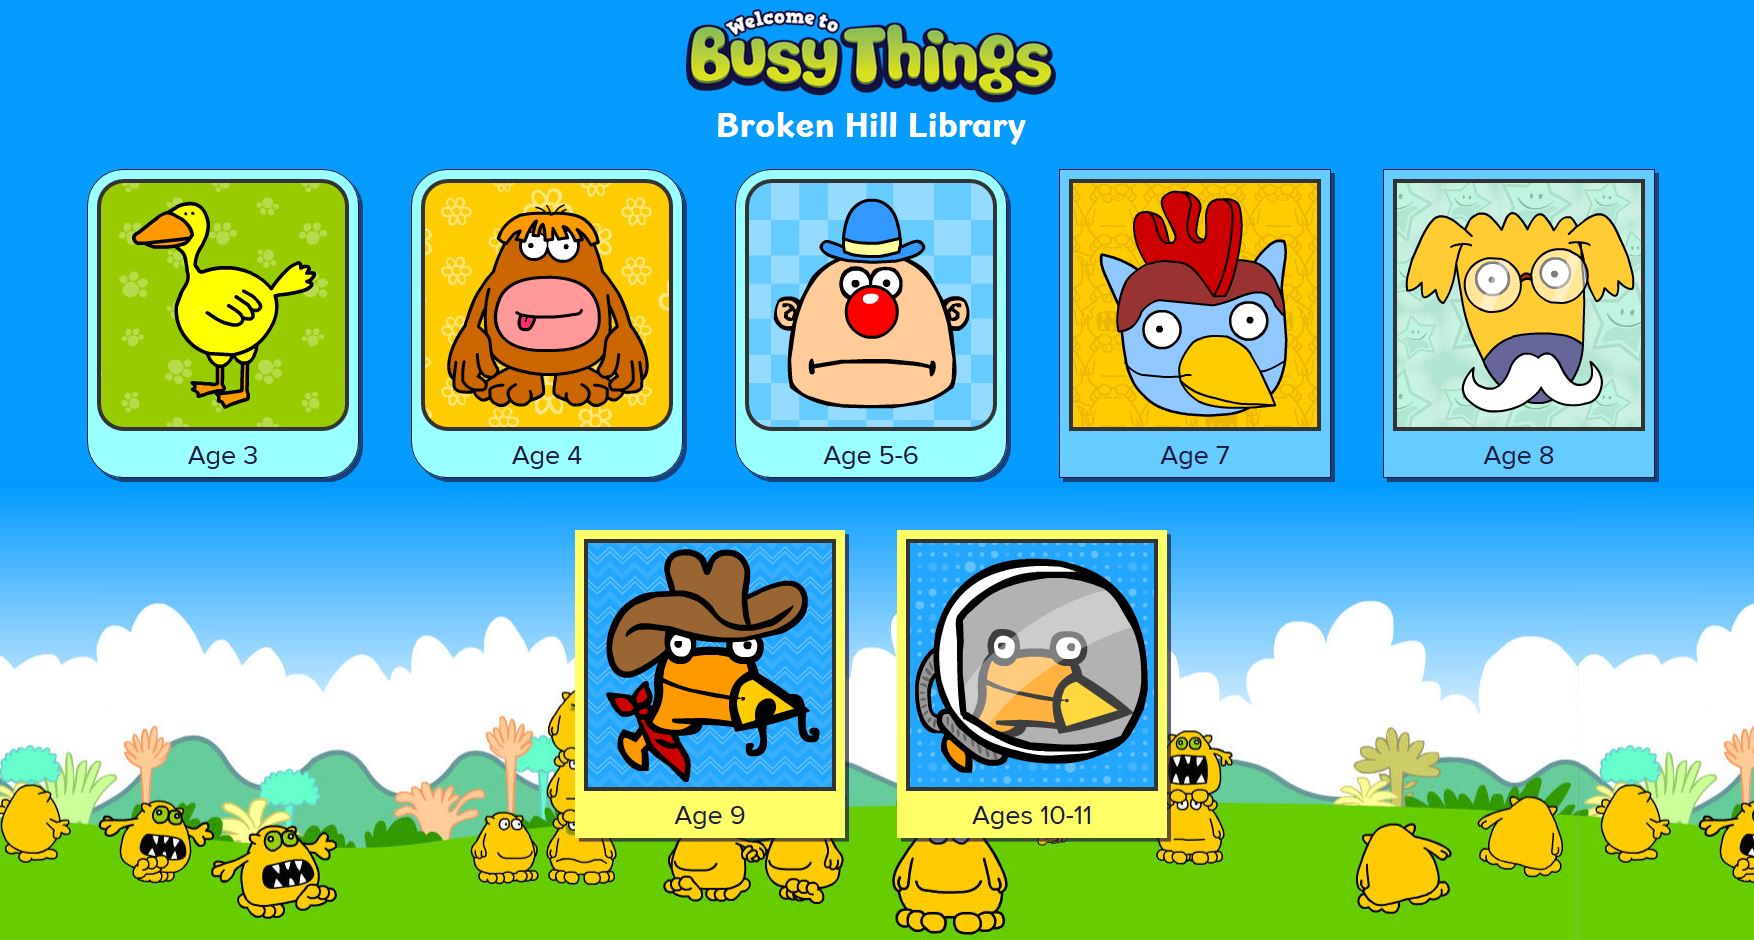 Screenshot of Busy things home page with wording - Welcome to Busy things for Broken Hill Library, there are seperate activity icons for ages 3 - 11.